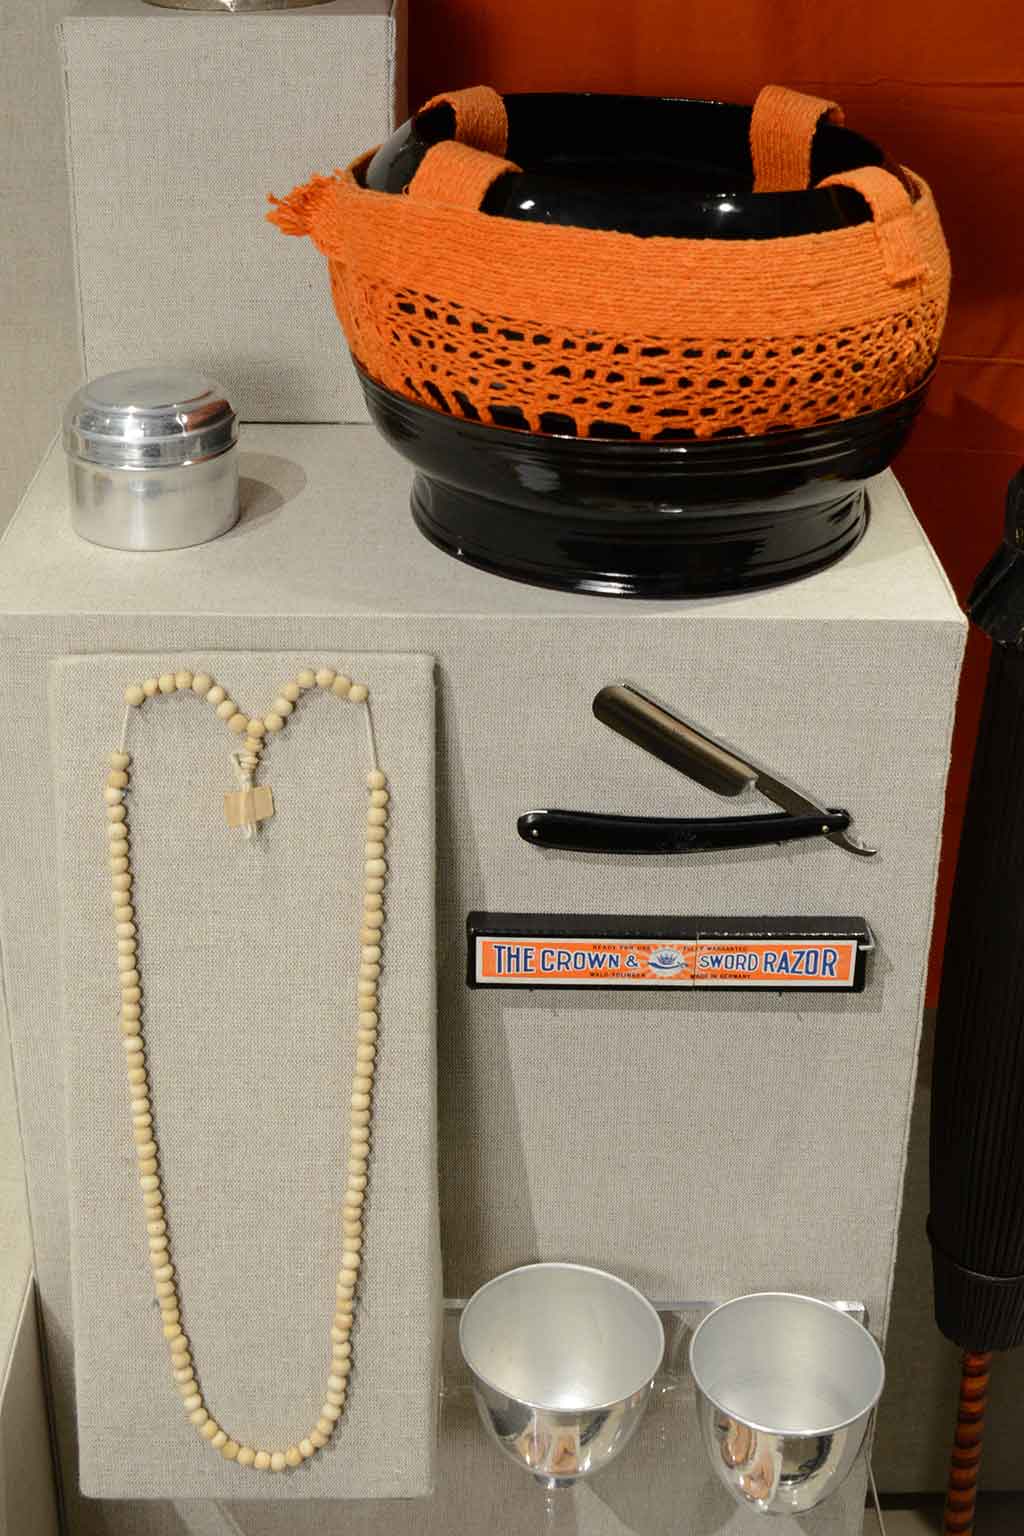 beads, a razor, and various containers on exhibit